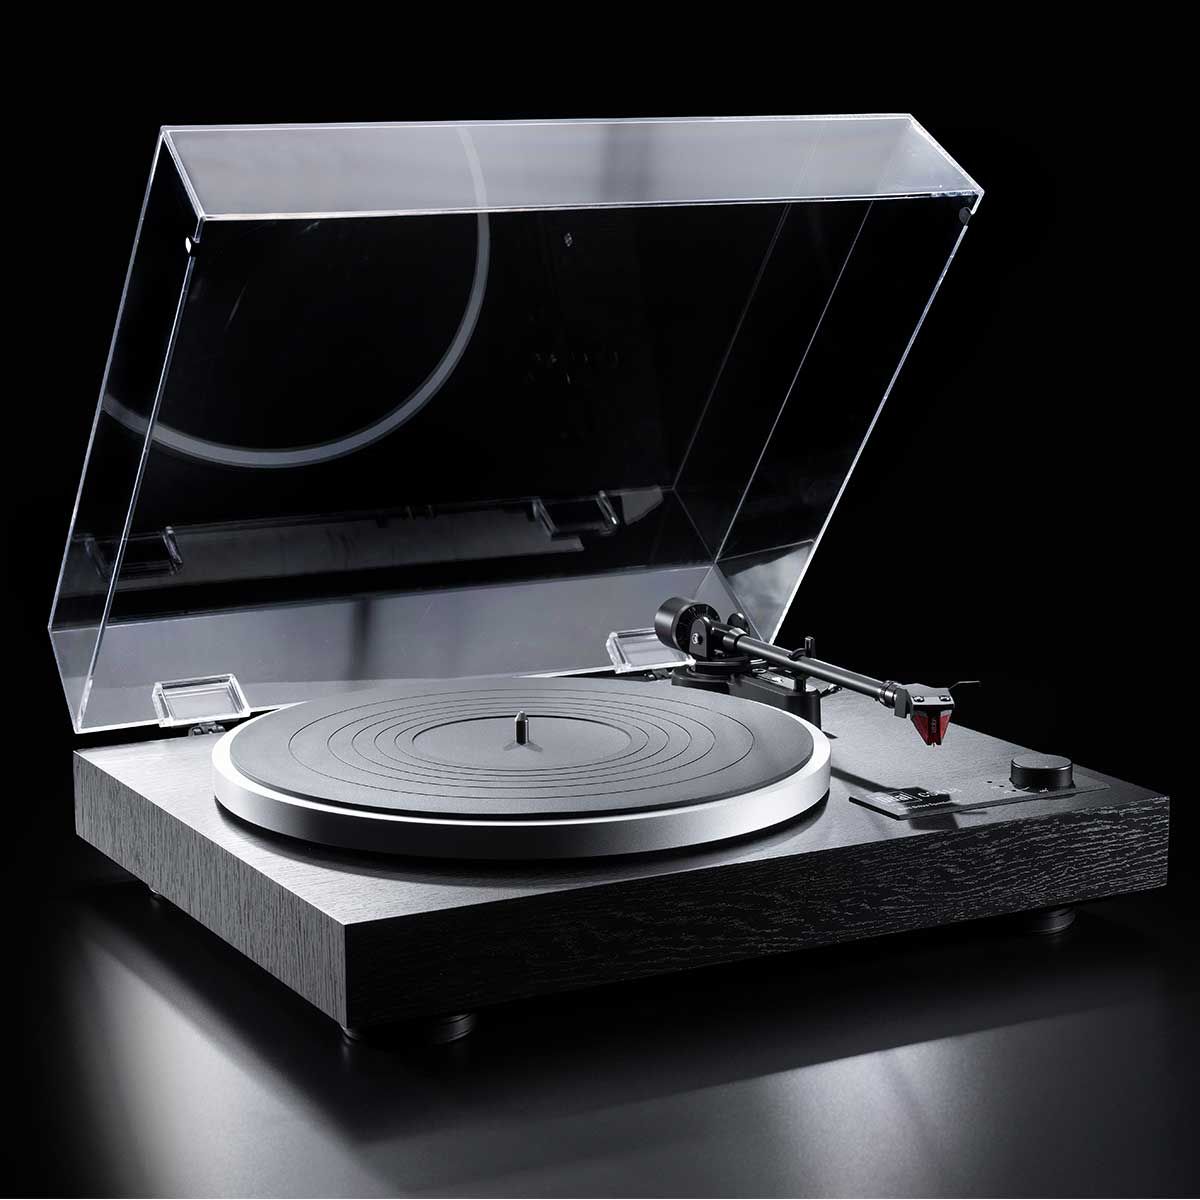 Dual CS418 Manual Turntable, Black Vinyl, front angle with dustcover open